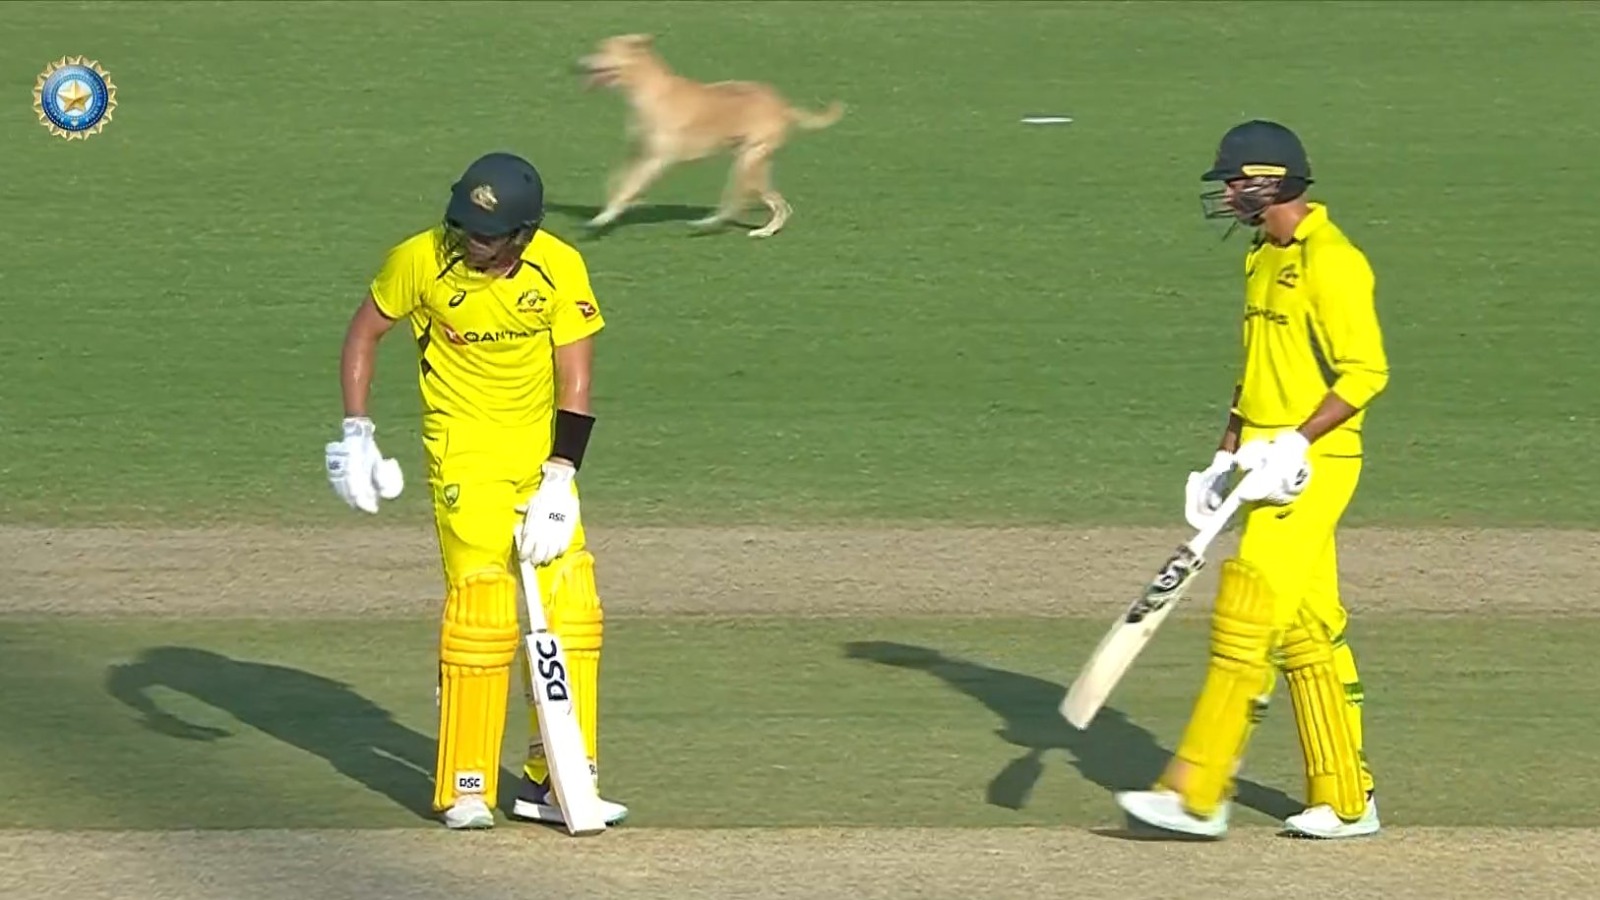 IND vs AUS 3rd ODI: WATCH 'Pawfect' 12th man interrupts IND AUS Chennai ODI, Crowd cheers on as dog stalls play at Chepauk - WATCH video